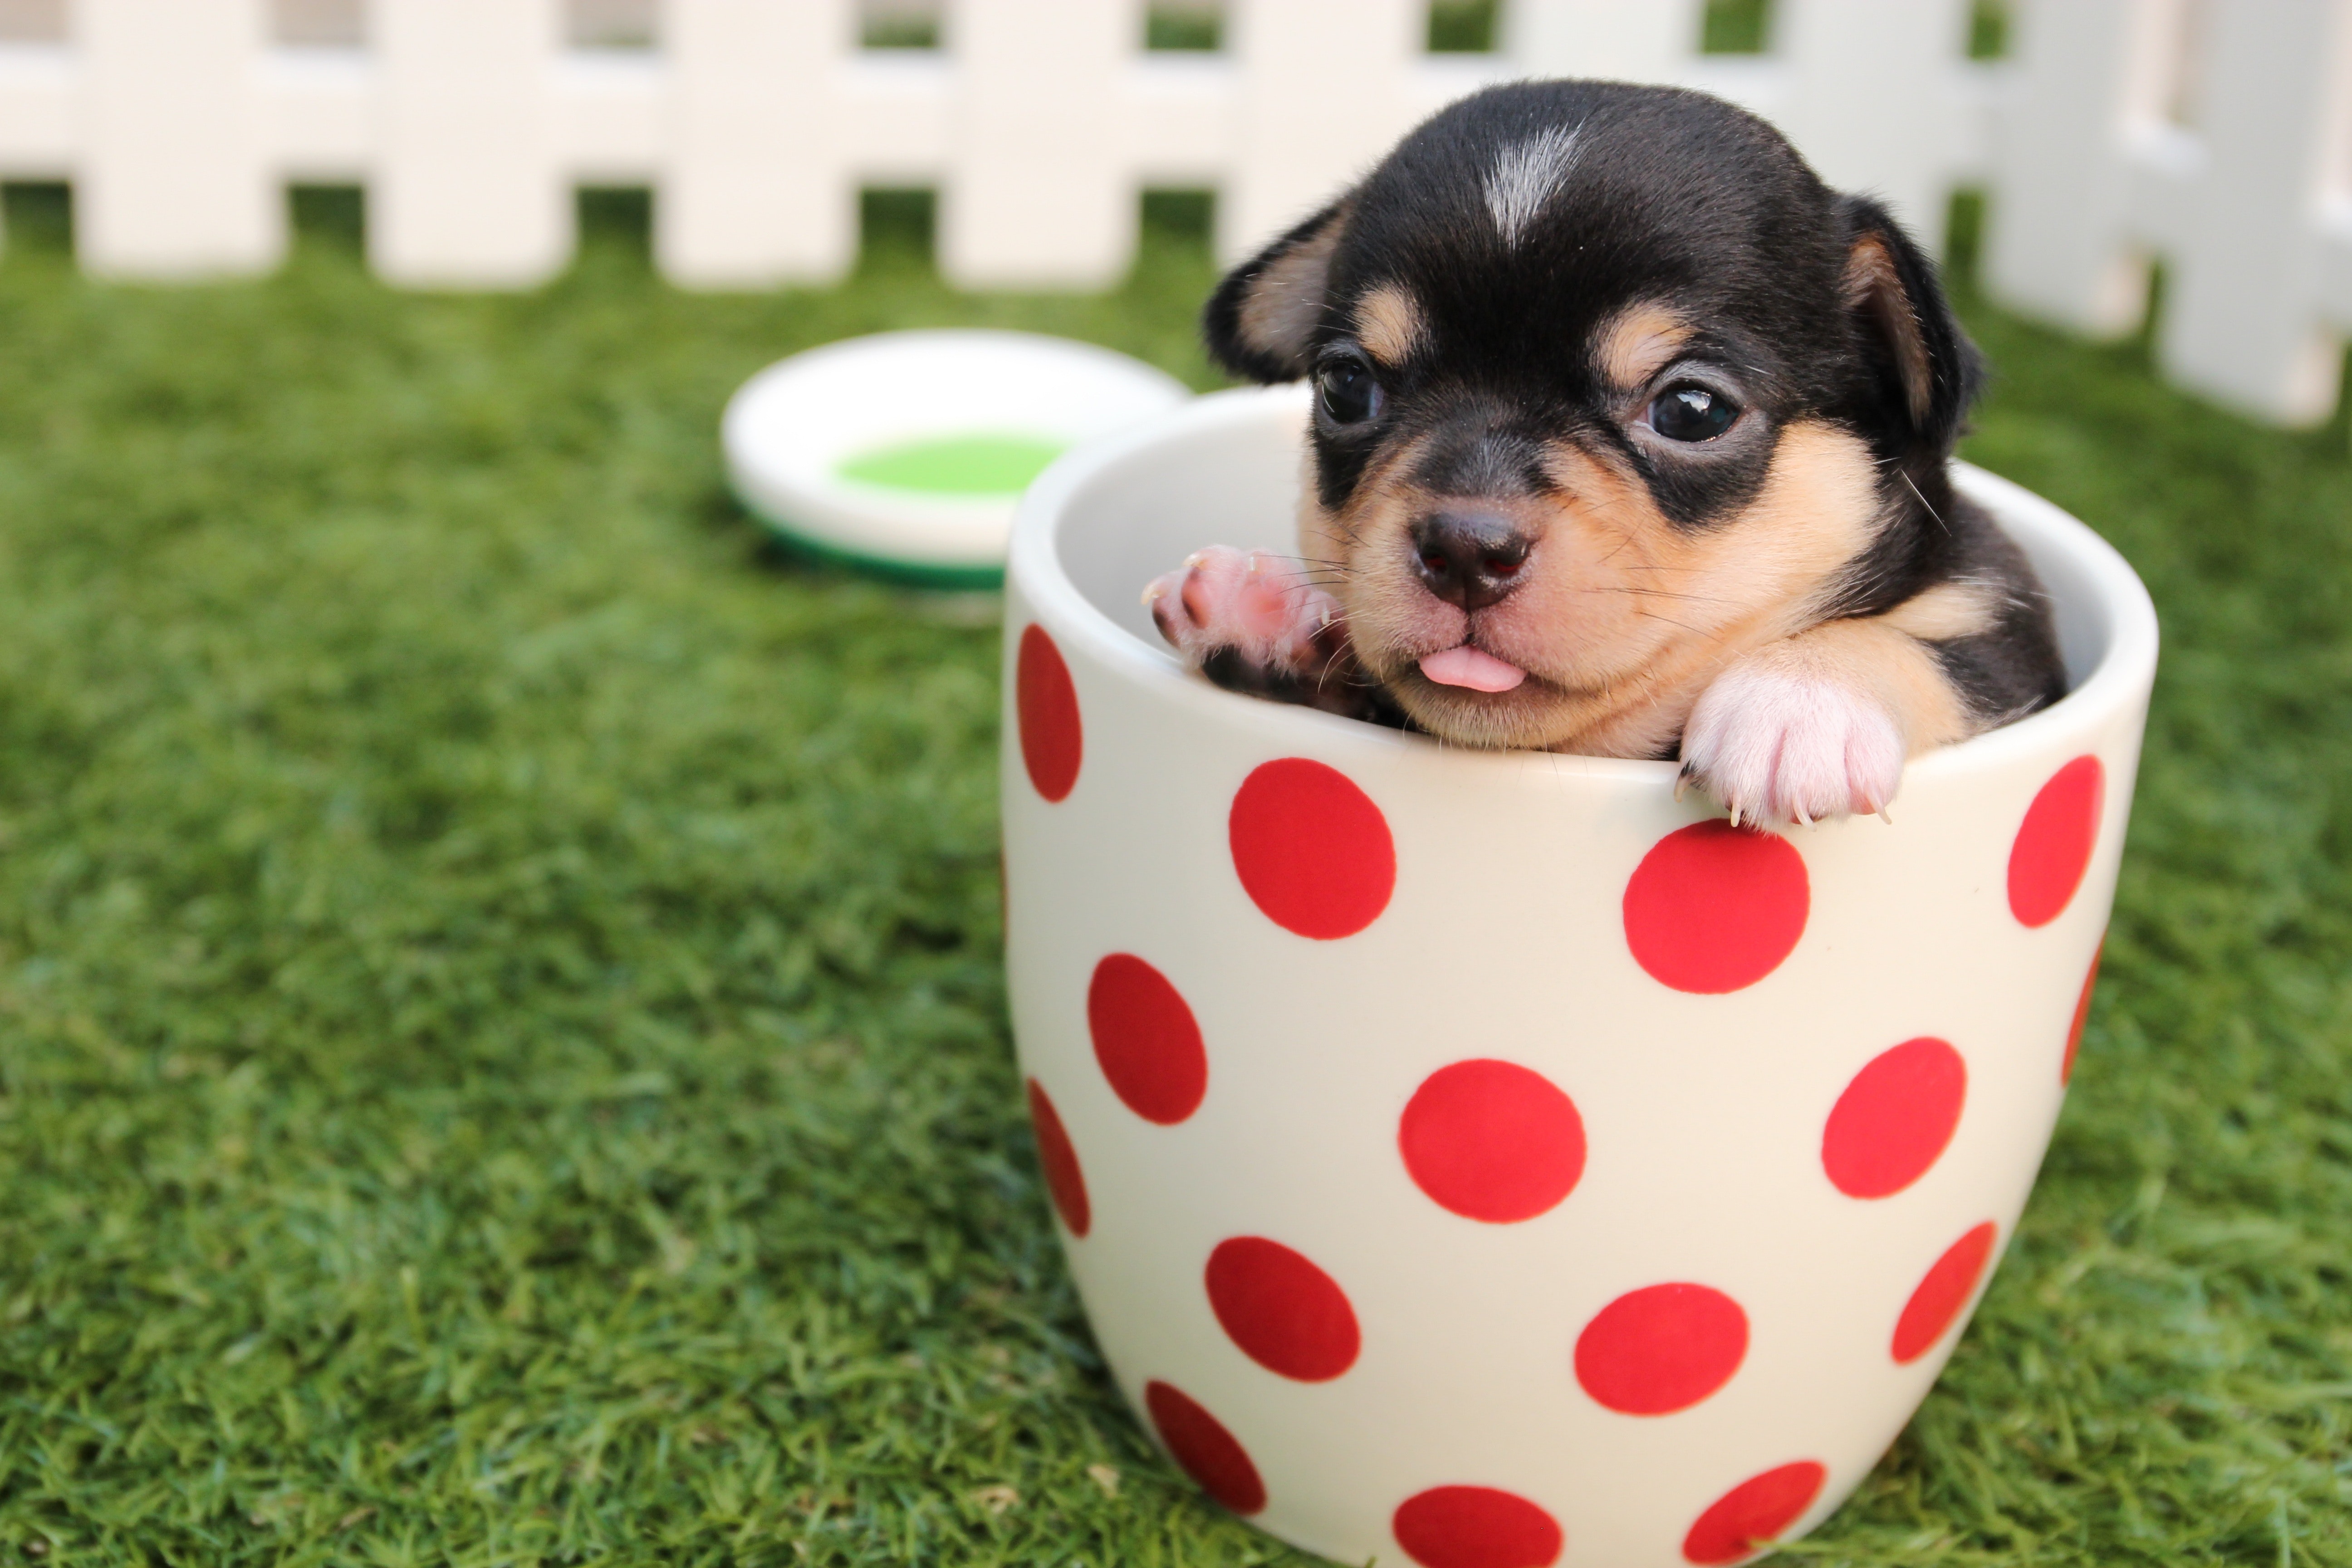 30 Shocking Facts About Teacup Dogs That You Have to Know